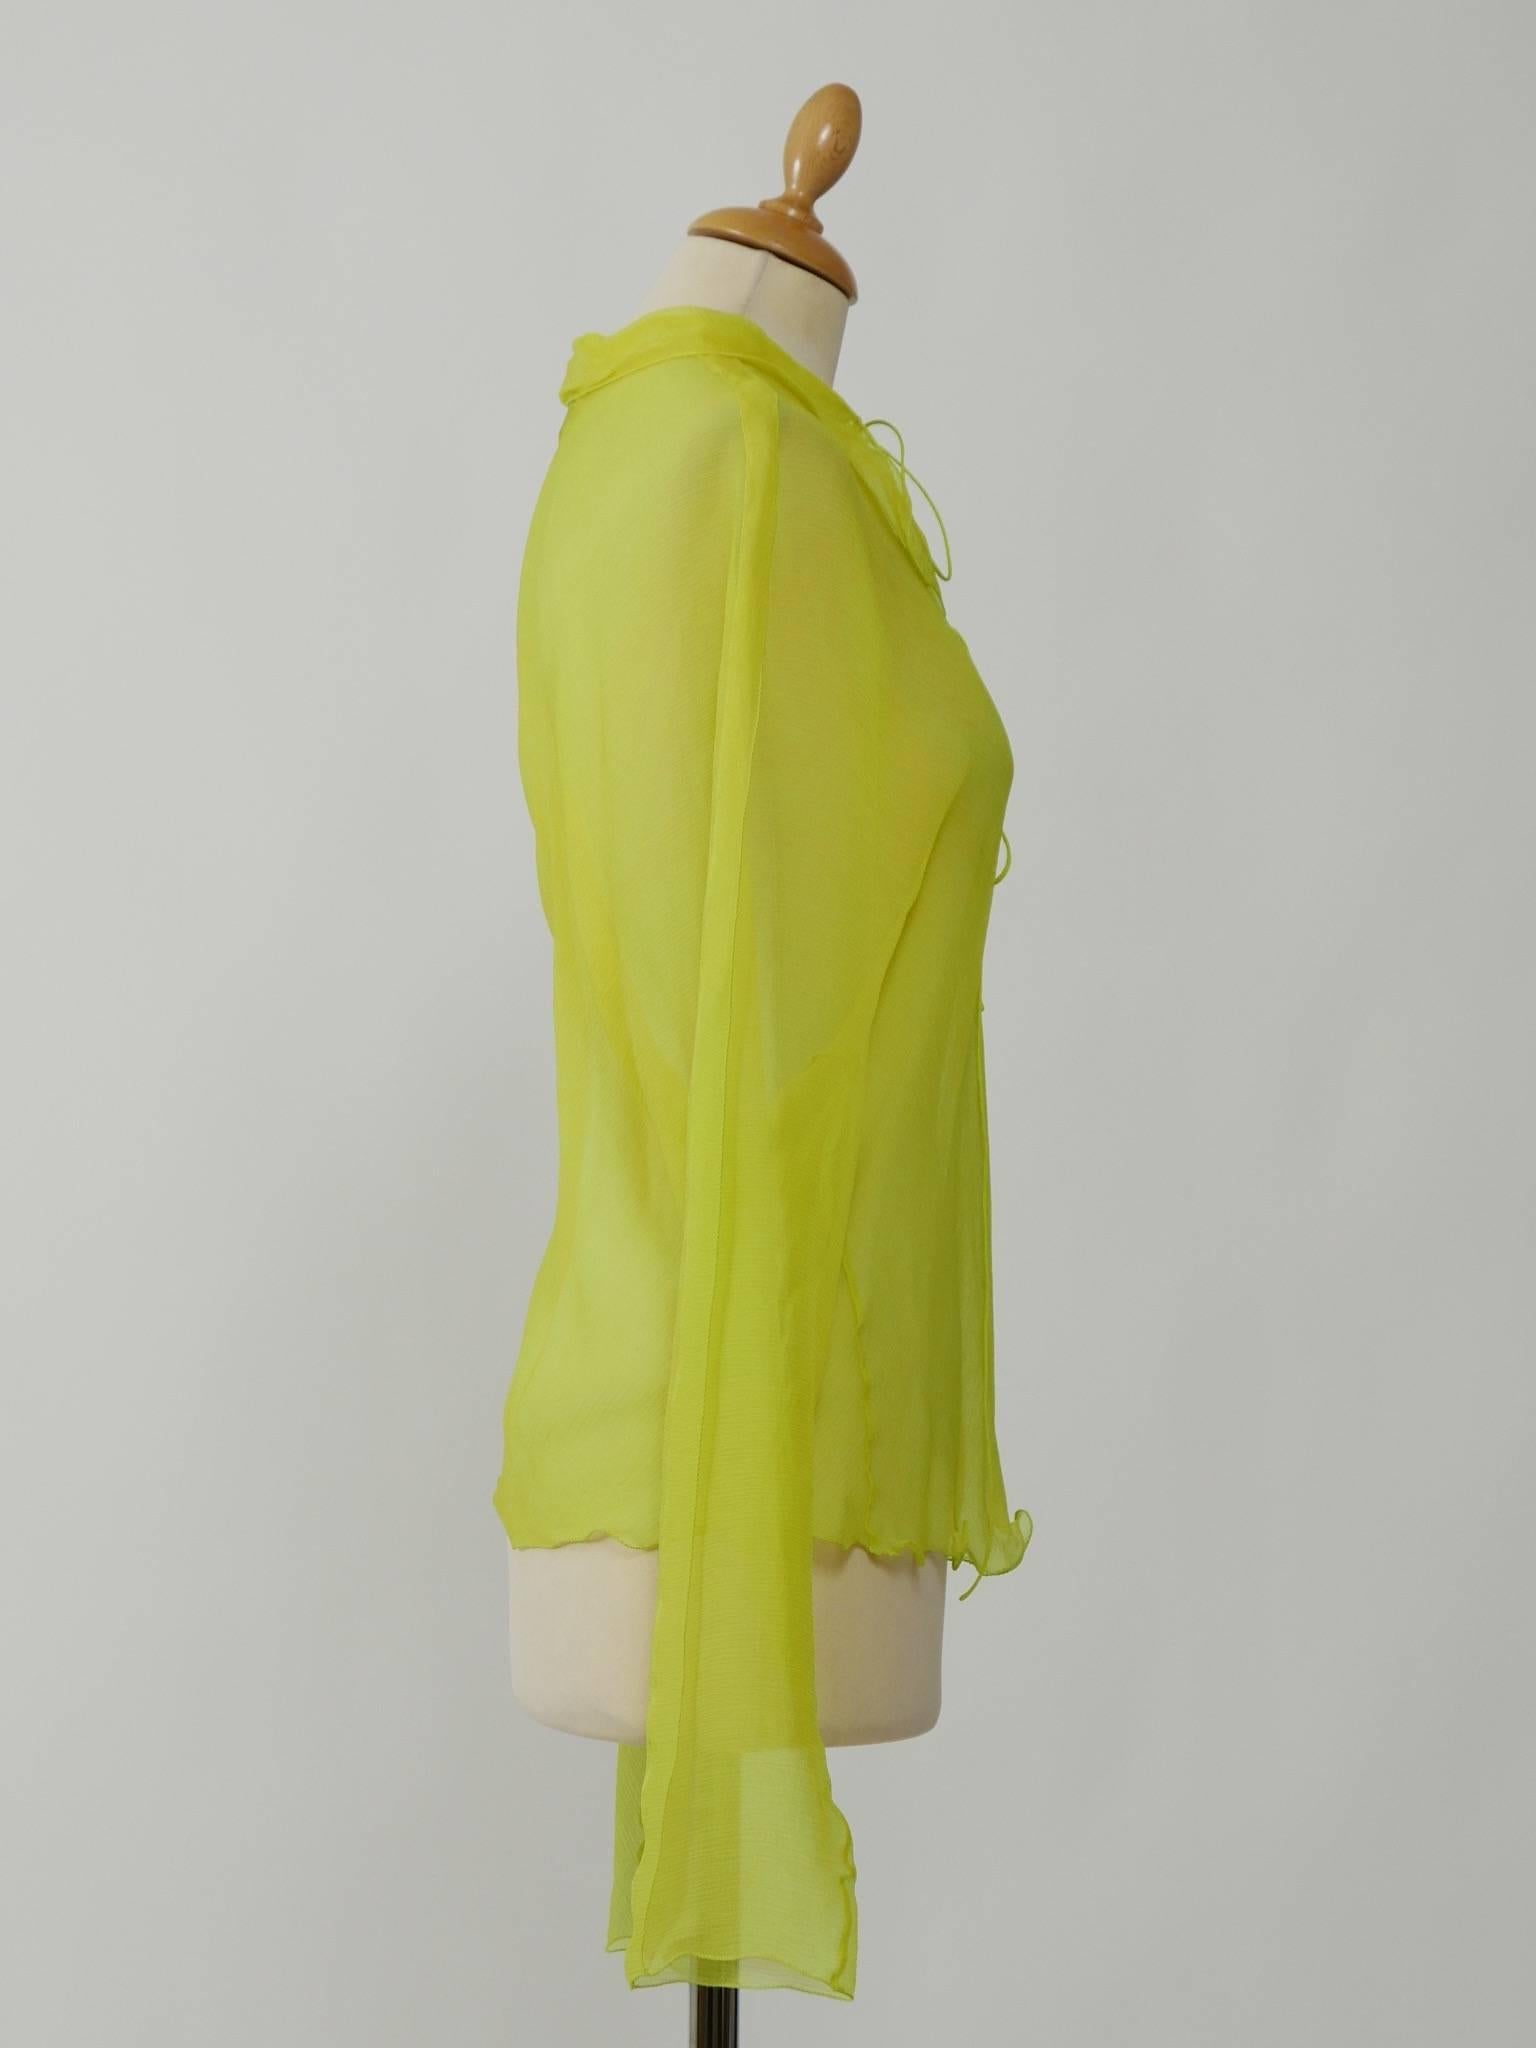 This gorgeous Fendi blouse shirt is in a yellow lime stretch organdy silk fabric. It has long sleeves and tie closure.

Very good vintage condition. 

Label: Fendi - Made in Italy 
Fabric: silk
Color: yellow lime

Measurement